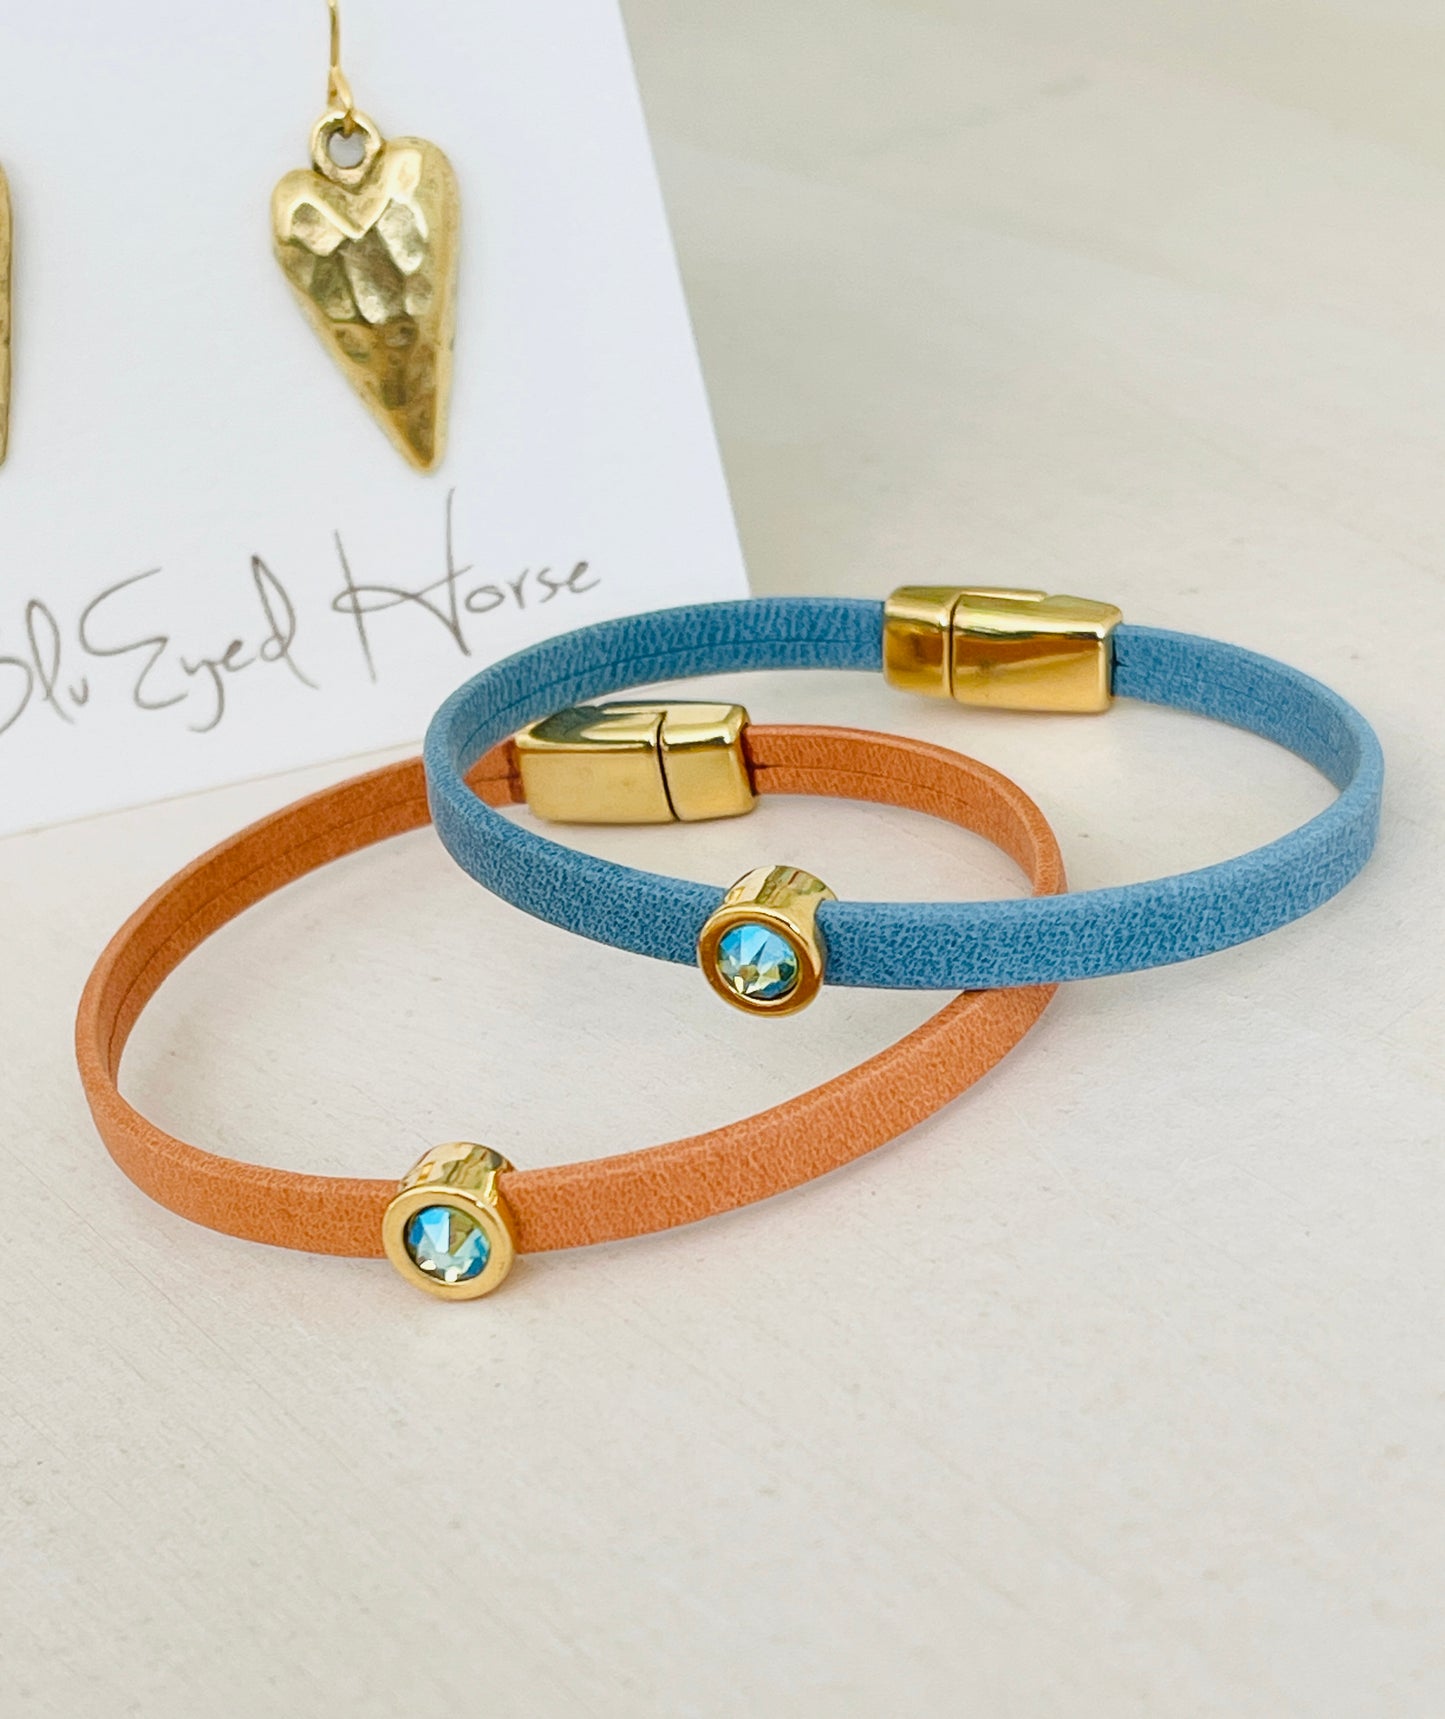 Mini Ginger Bracelet and blue bracelet with gold heart shaped pendant in background on table